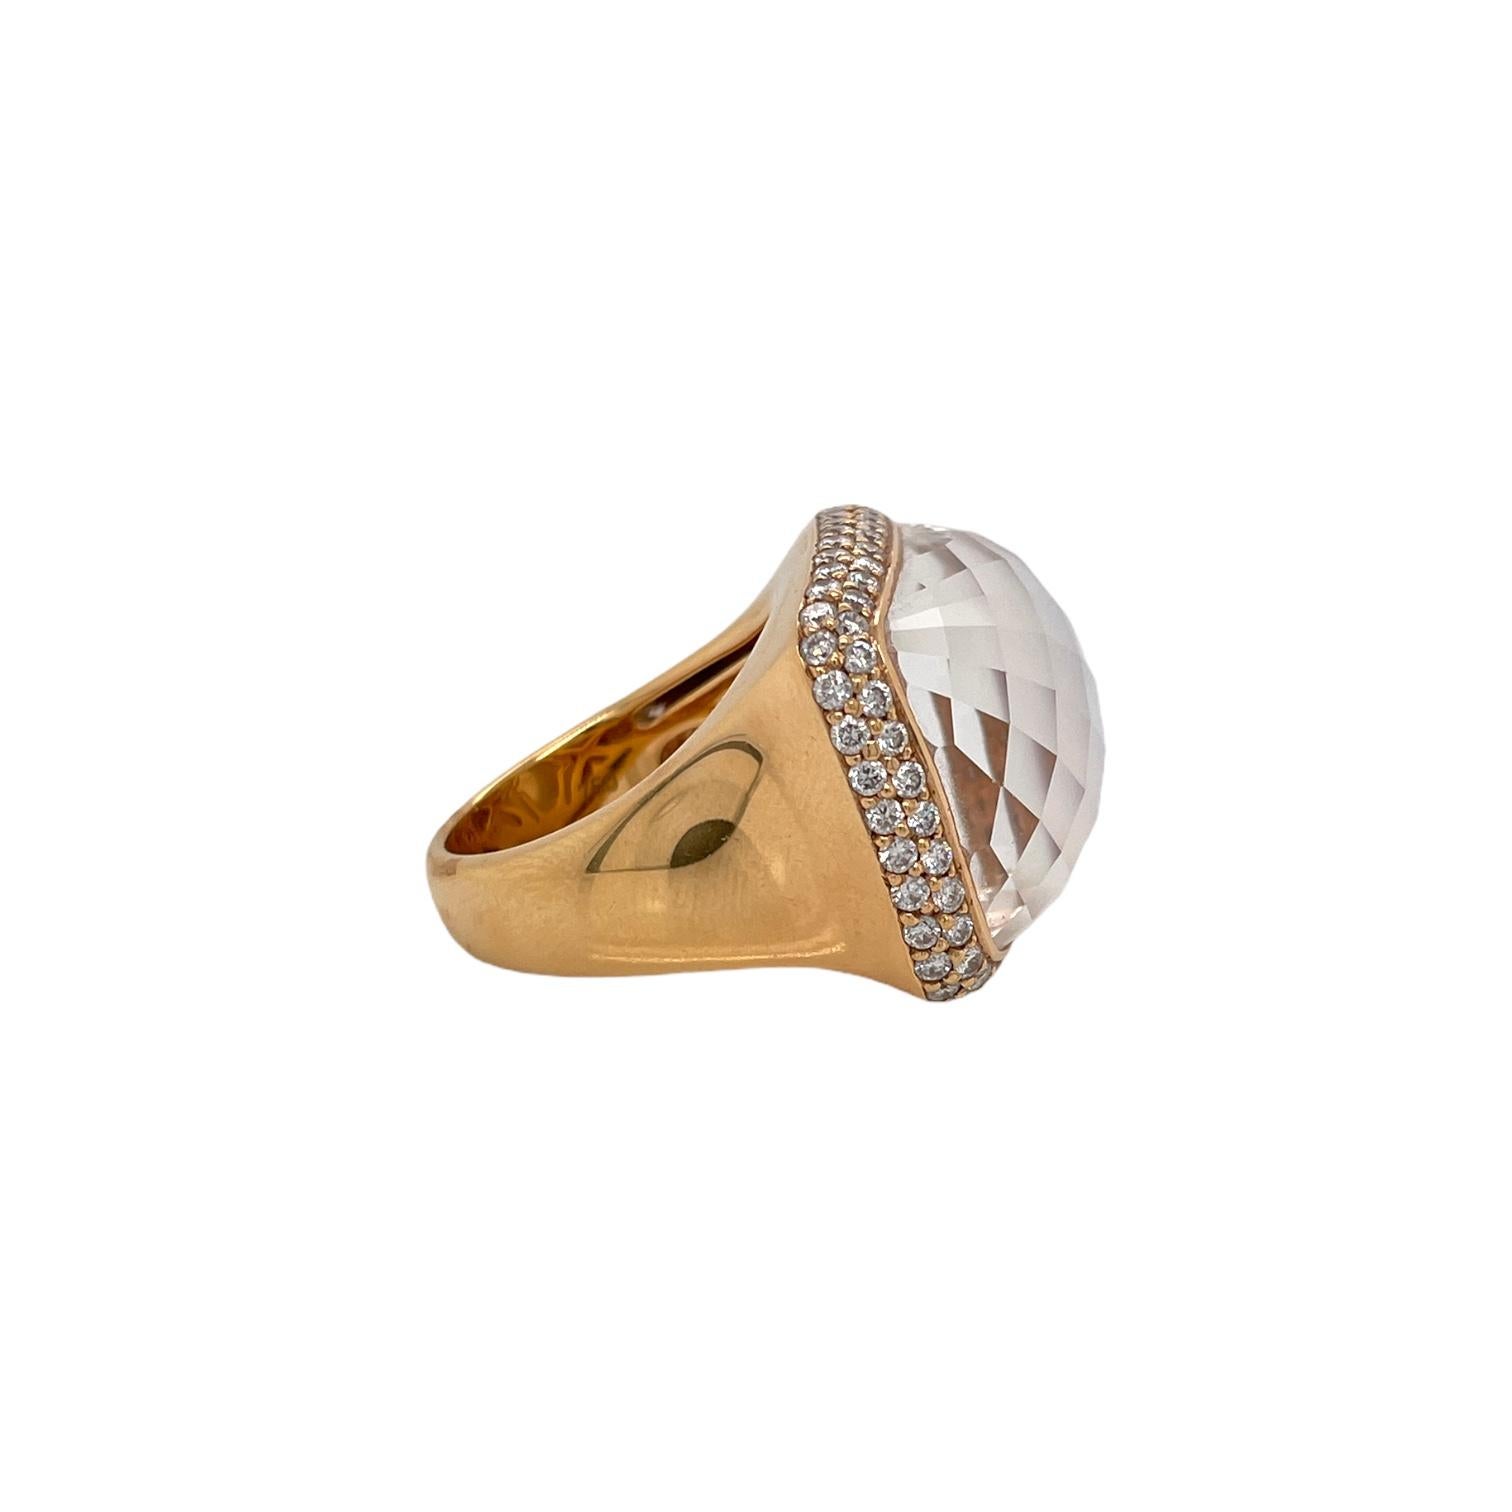 Cushion Cut Large Mother of Pearl & Quartz Cocktail Ring in 18k Yellow Gold